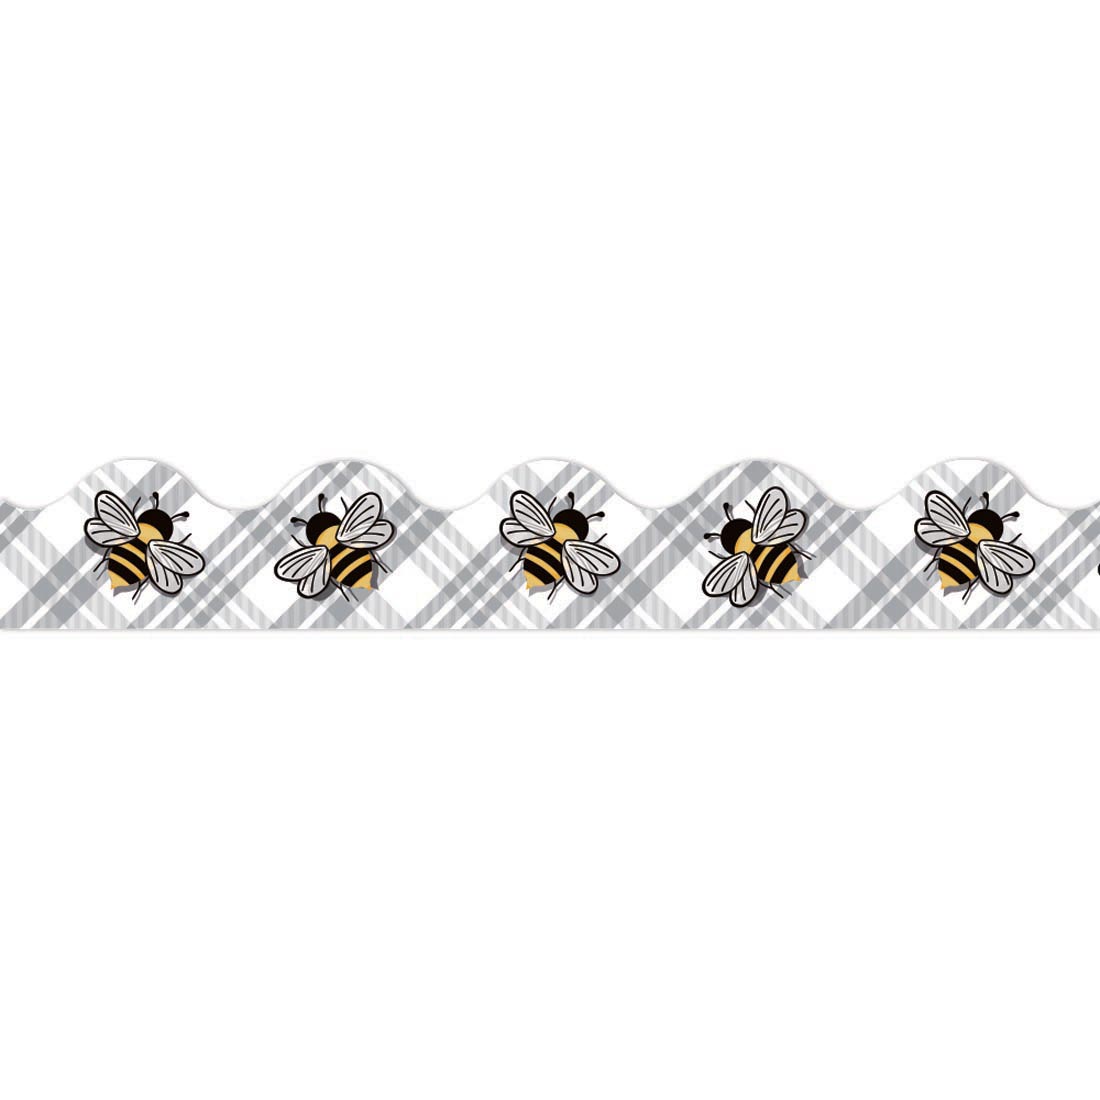 Bees Deco Trim from The Hive collection by Eureka